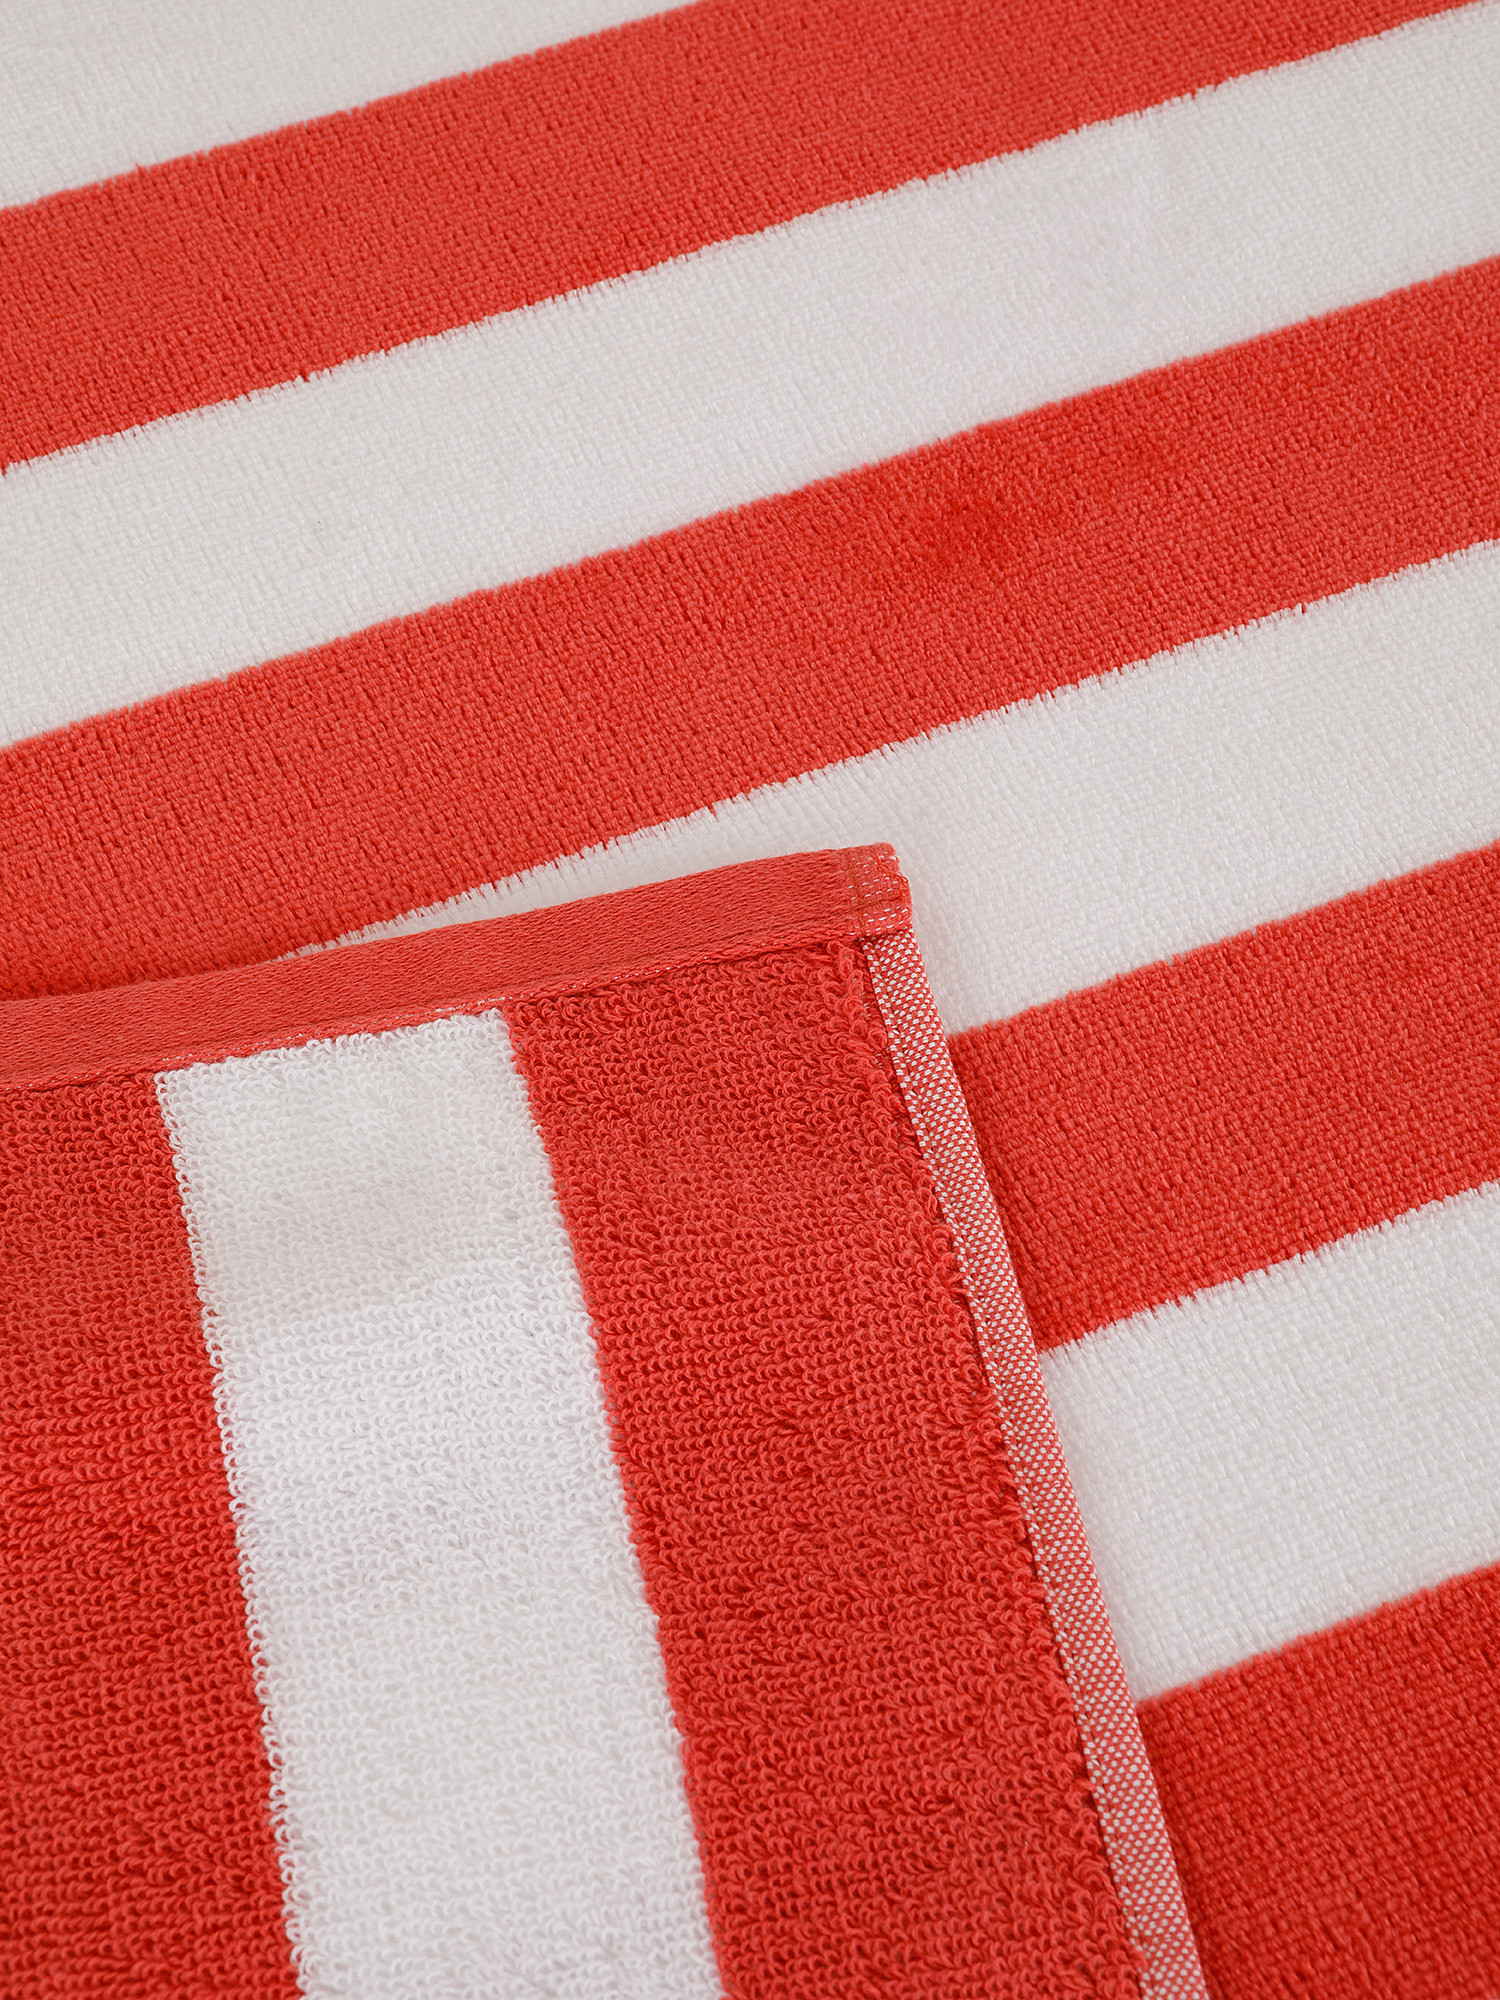 Cotton velor beach towel with striped pattern, Red, large image number 1